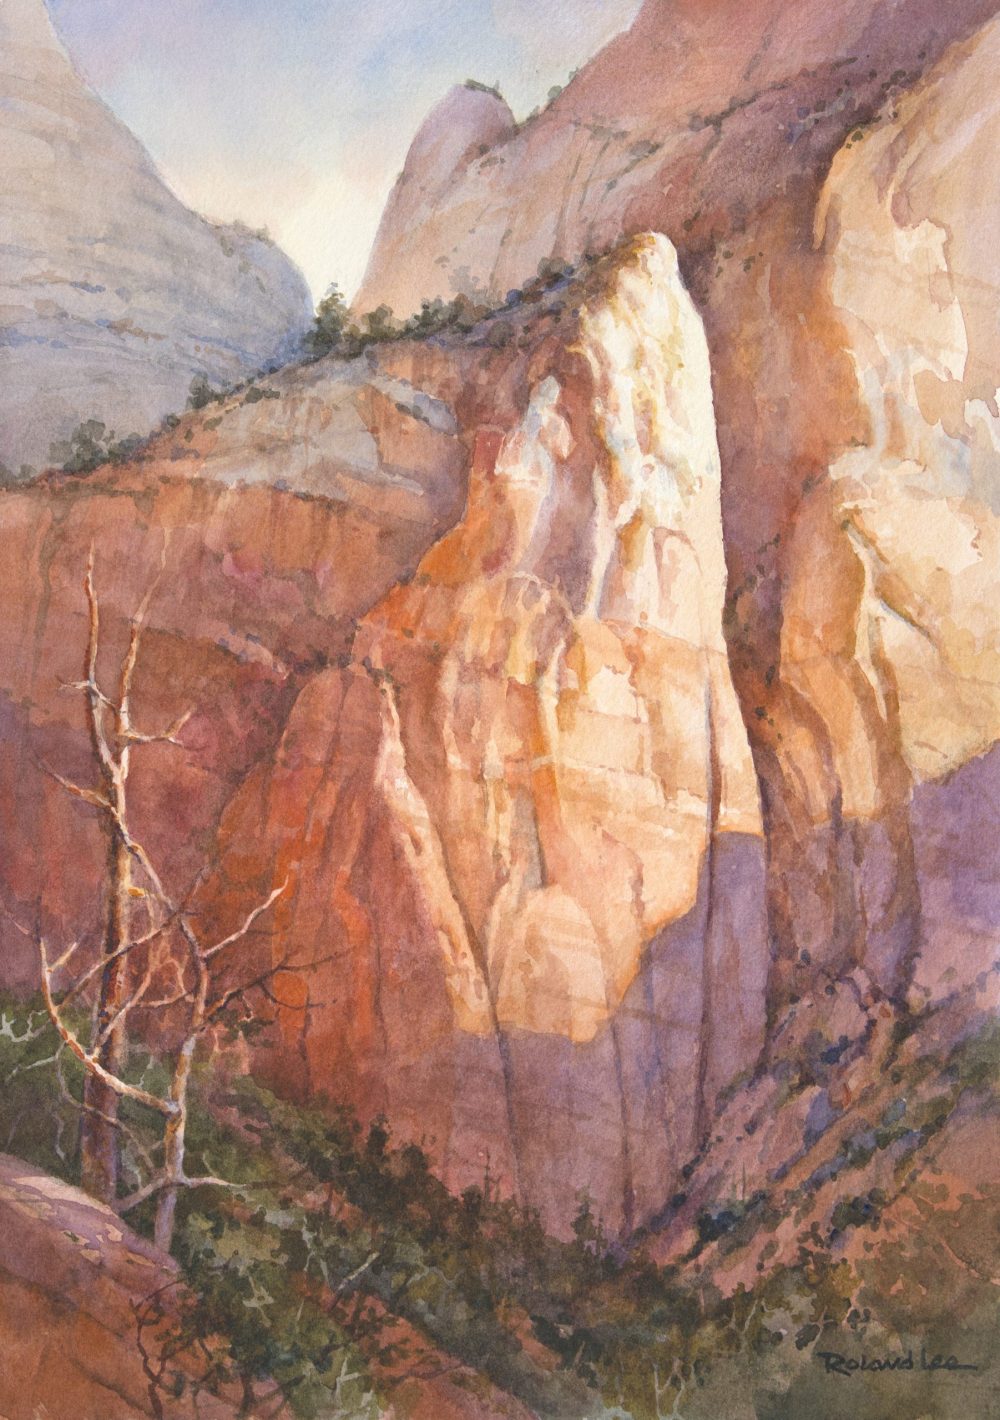 Basking in Sunlight - Watercolor Painting of The Sentinel Cliffs in Zion National Park